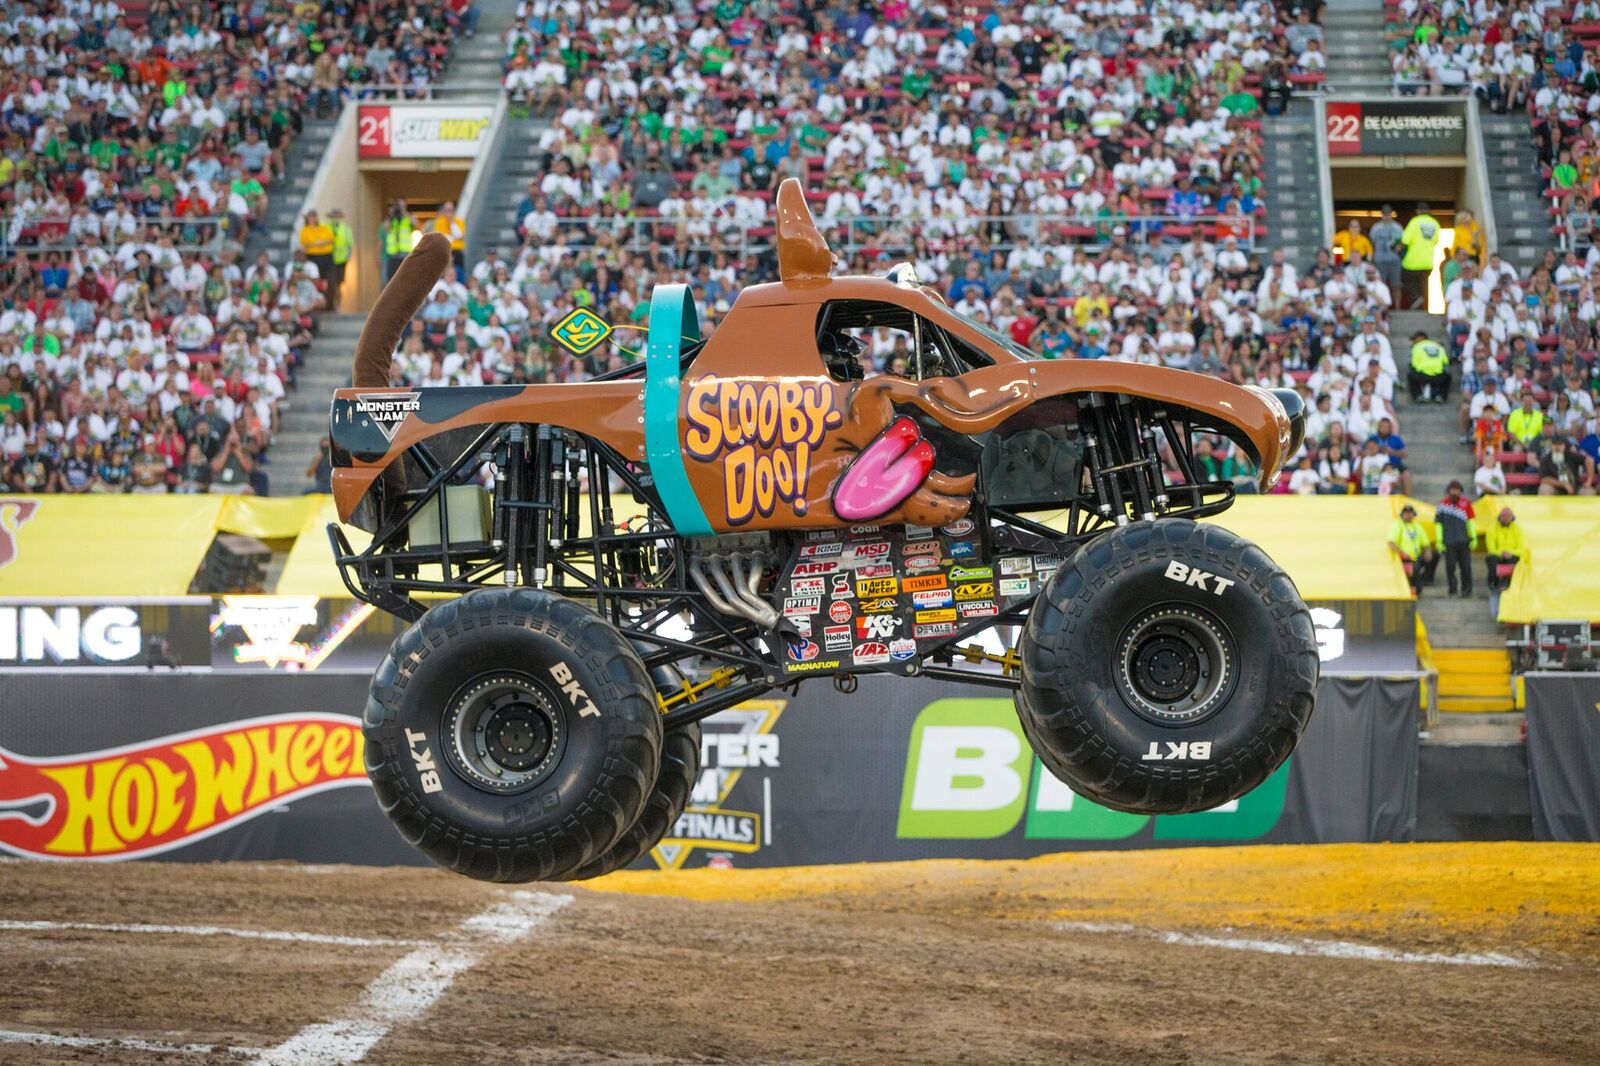 Tampa Monster Jam Tickets and Giveaway MULTICULTURAL MAVEN